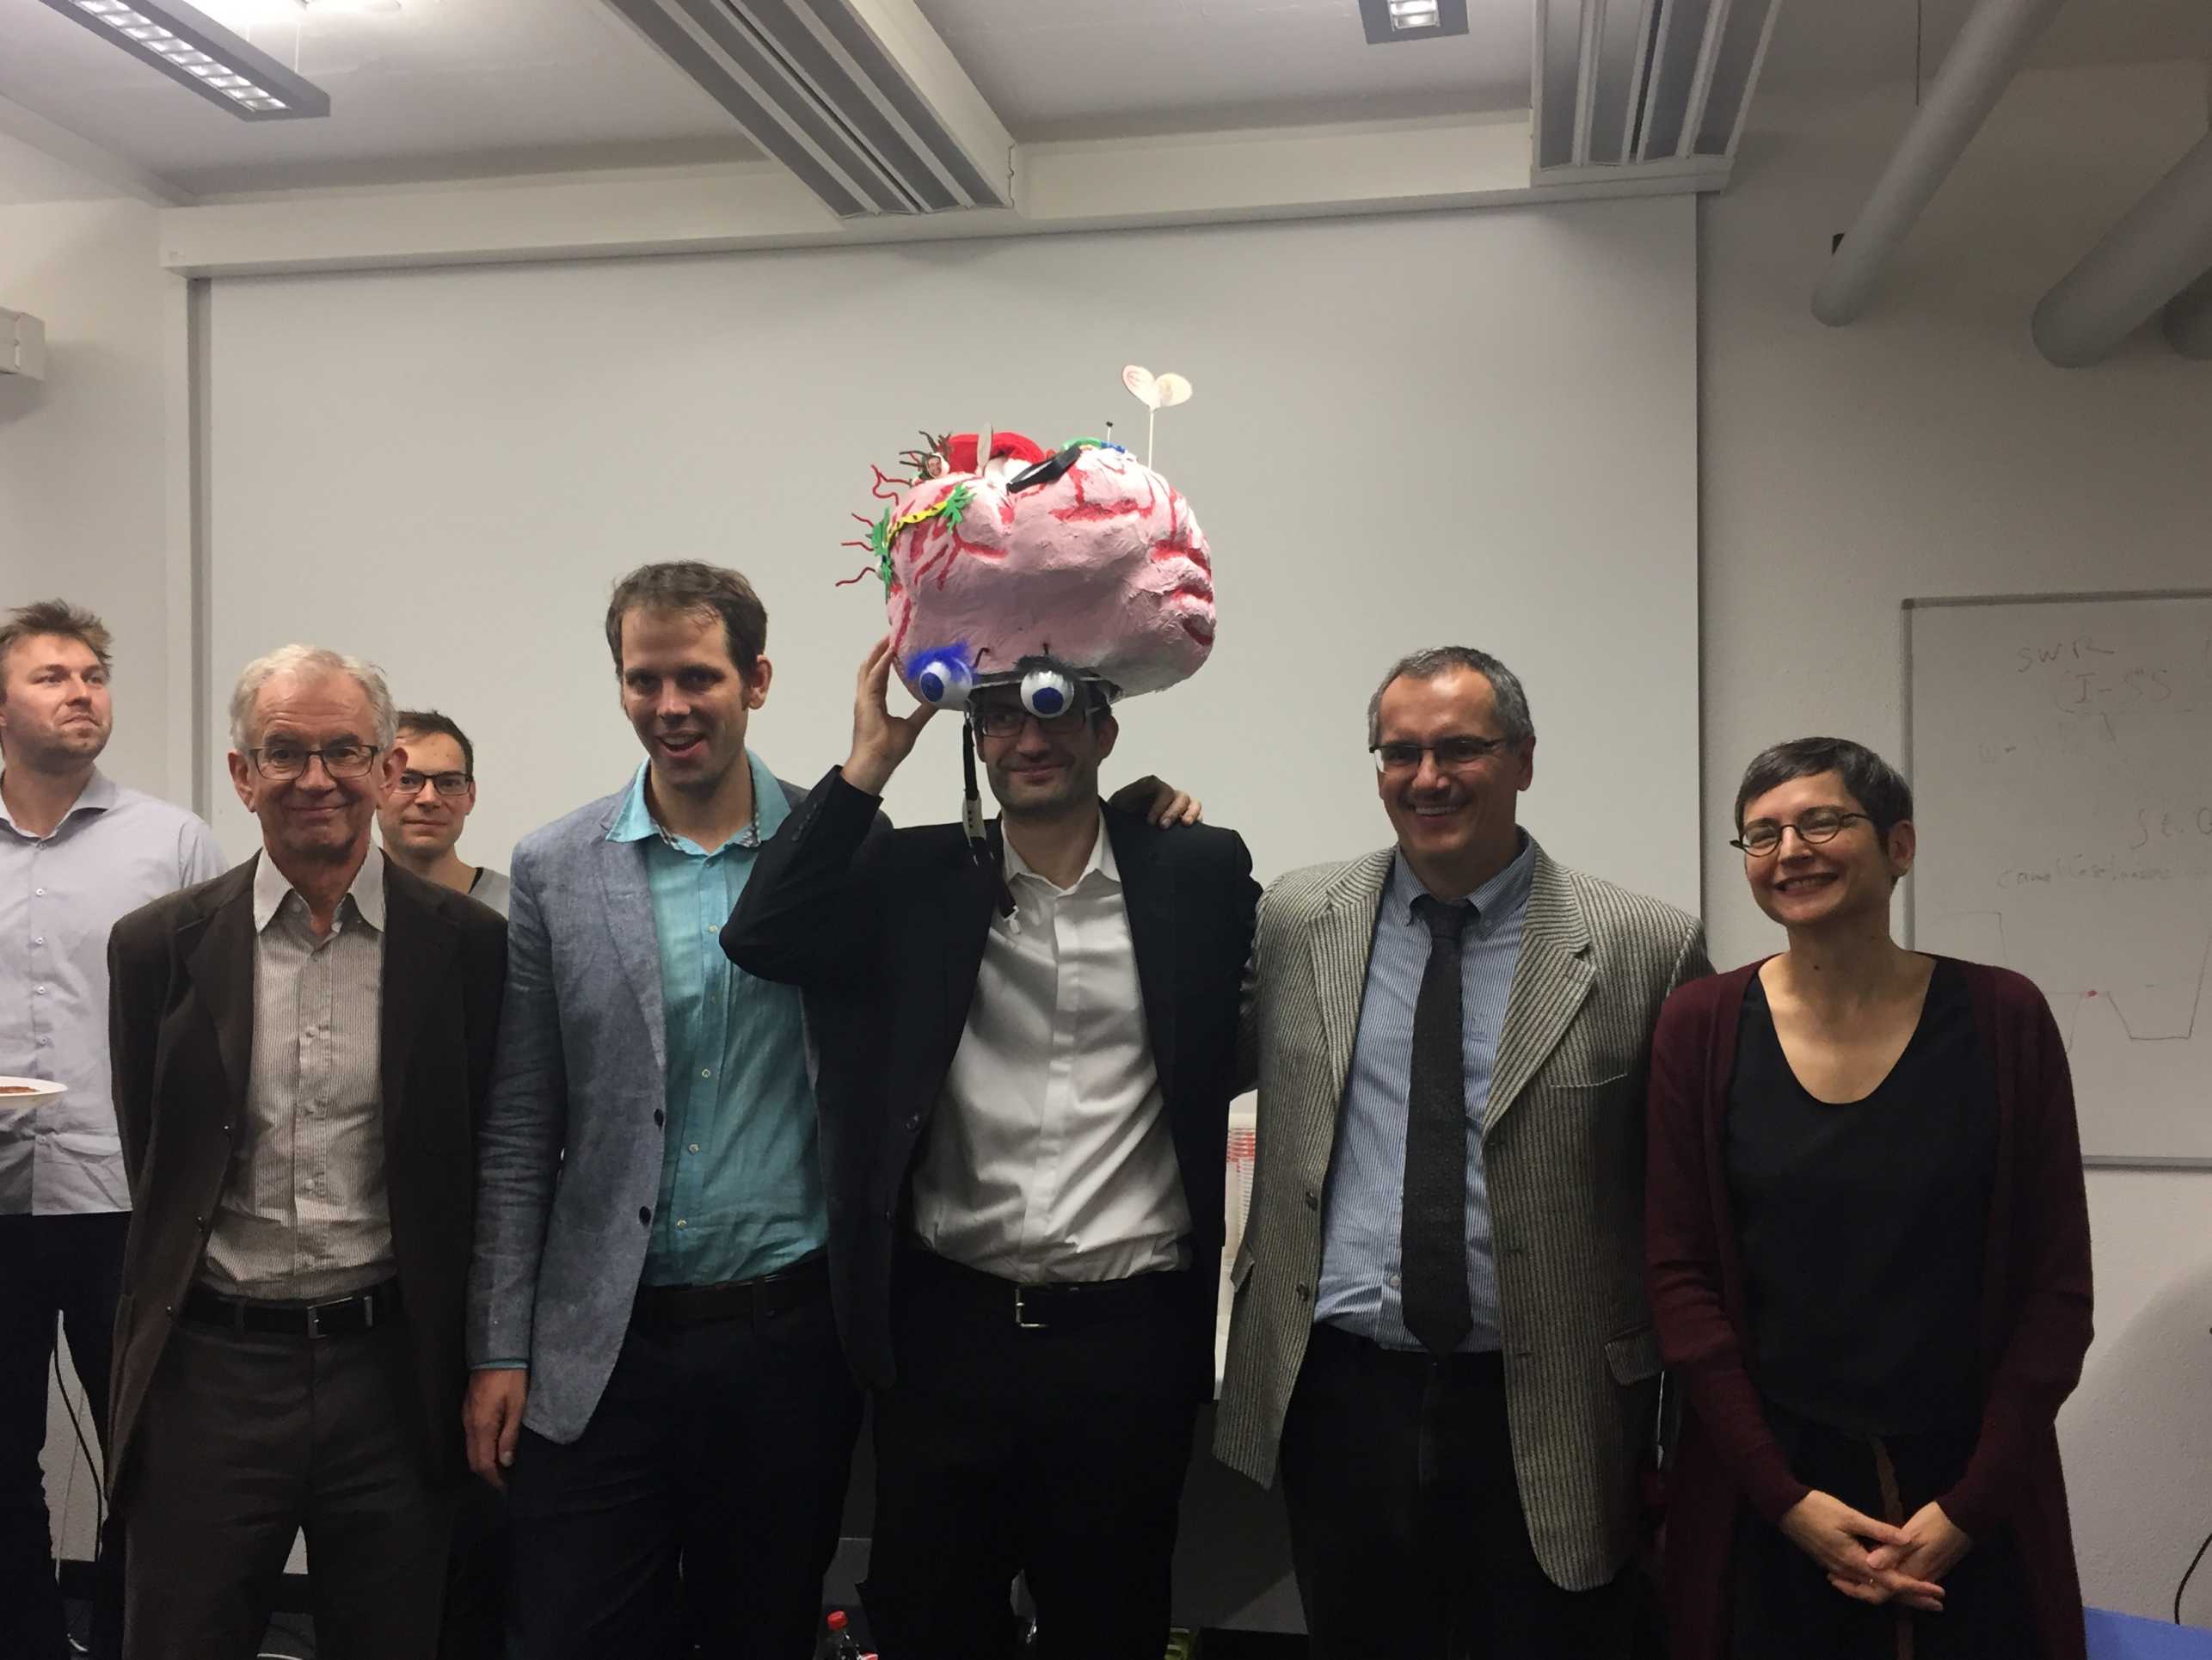 Enlarged view: The LBB has a new Doctor: Dr. Harald Dermutz, who successfully defended his thesis on <i>Patterned Neurons in a Dish: In The Seek Of Order</i>. It was nice to see so many people, including alumni, joining the celebration of our Big Brain. All the best for the future Harald! Dont forget to pass by the lab to make us some icecreams with the fancy machine you received!